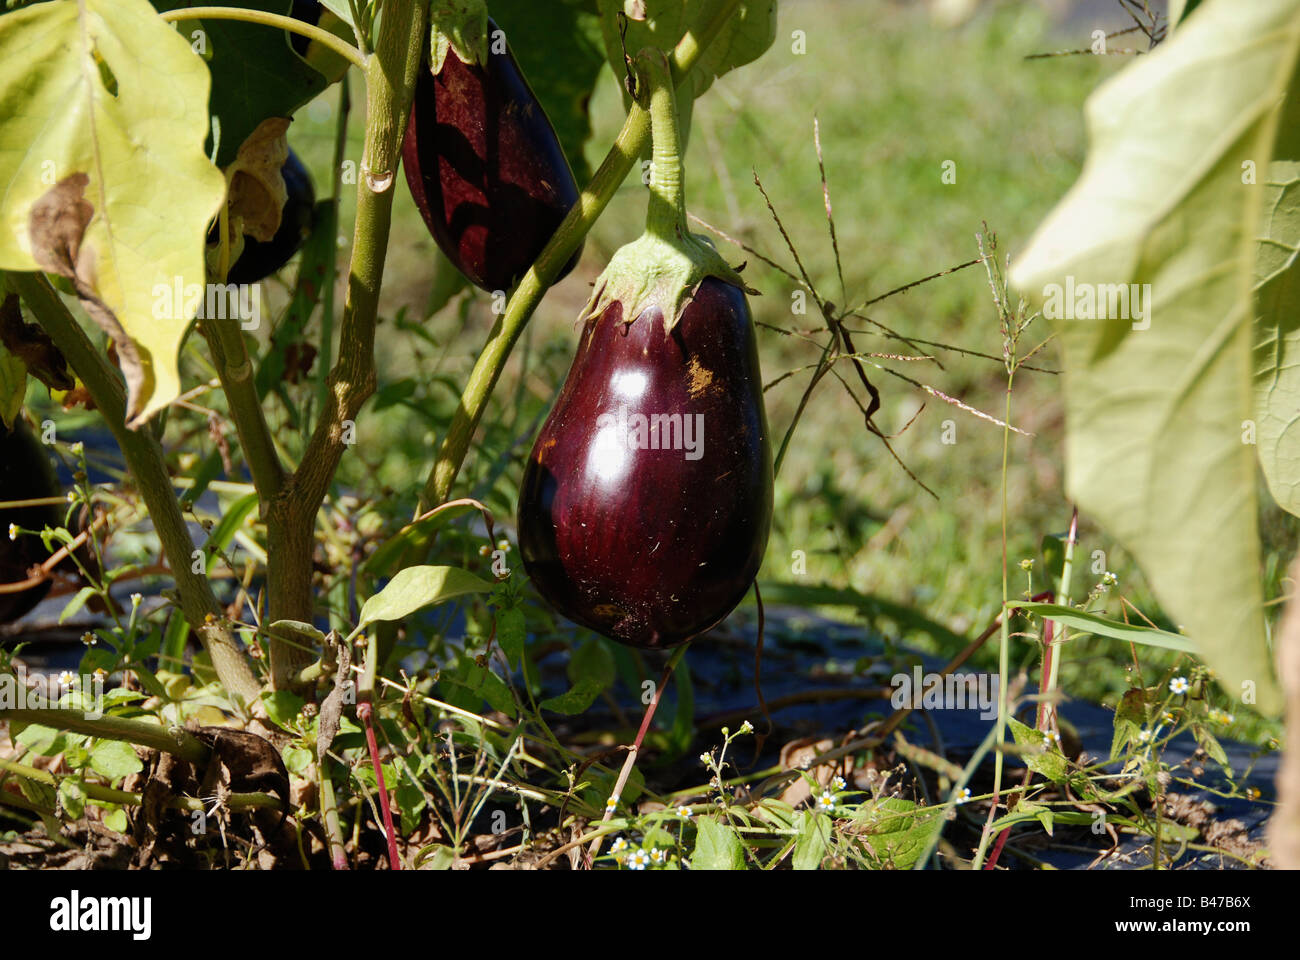 Jiló (Scarlet eggplant) is a fruit known for its bitter taste, widely  consumed in Brazi. Photographed on imperial palm leaf Stock Photo - Alamy